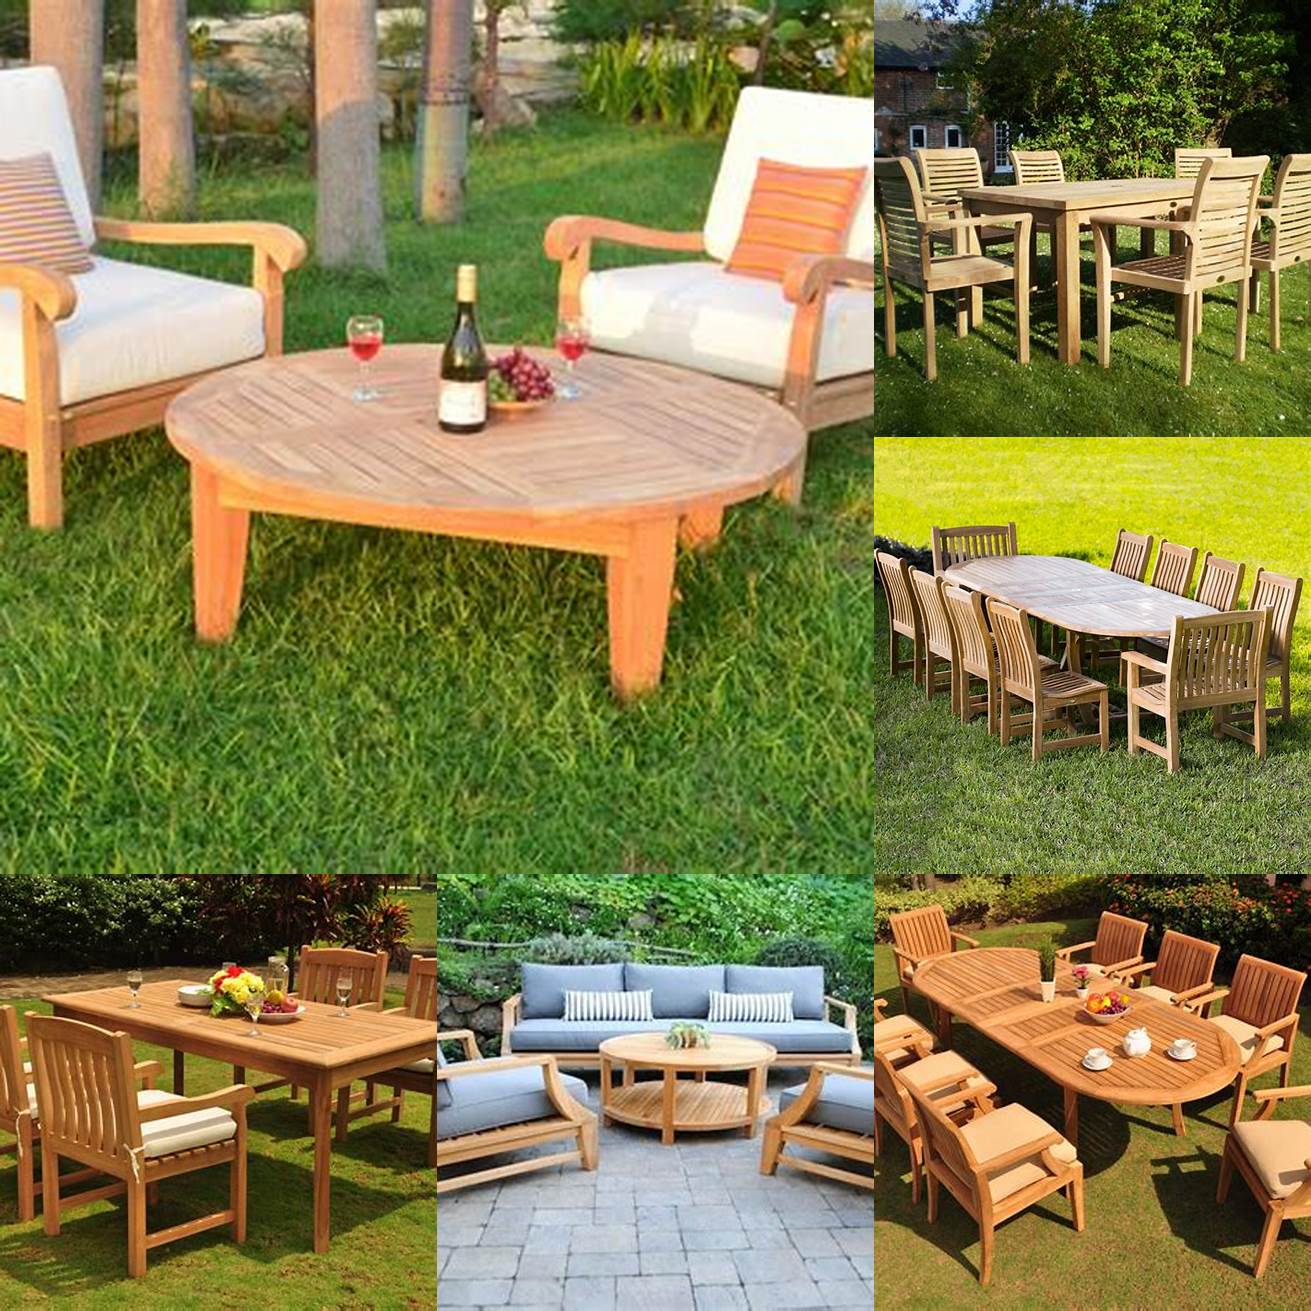 Photo of Teak furniture in different outdoor settings